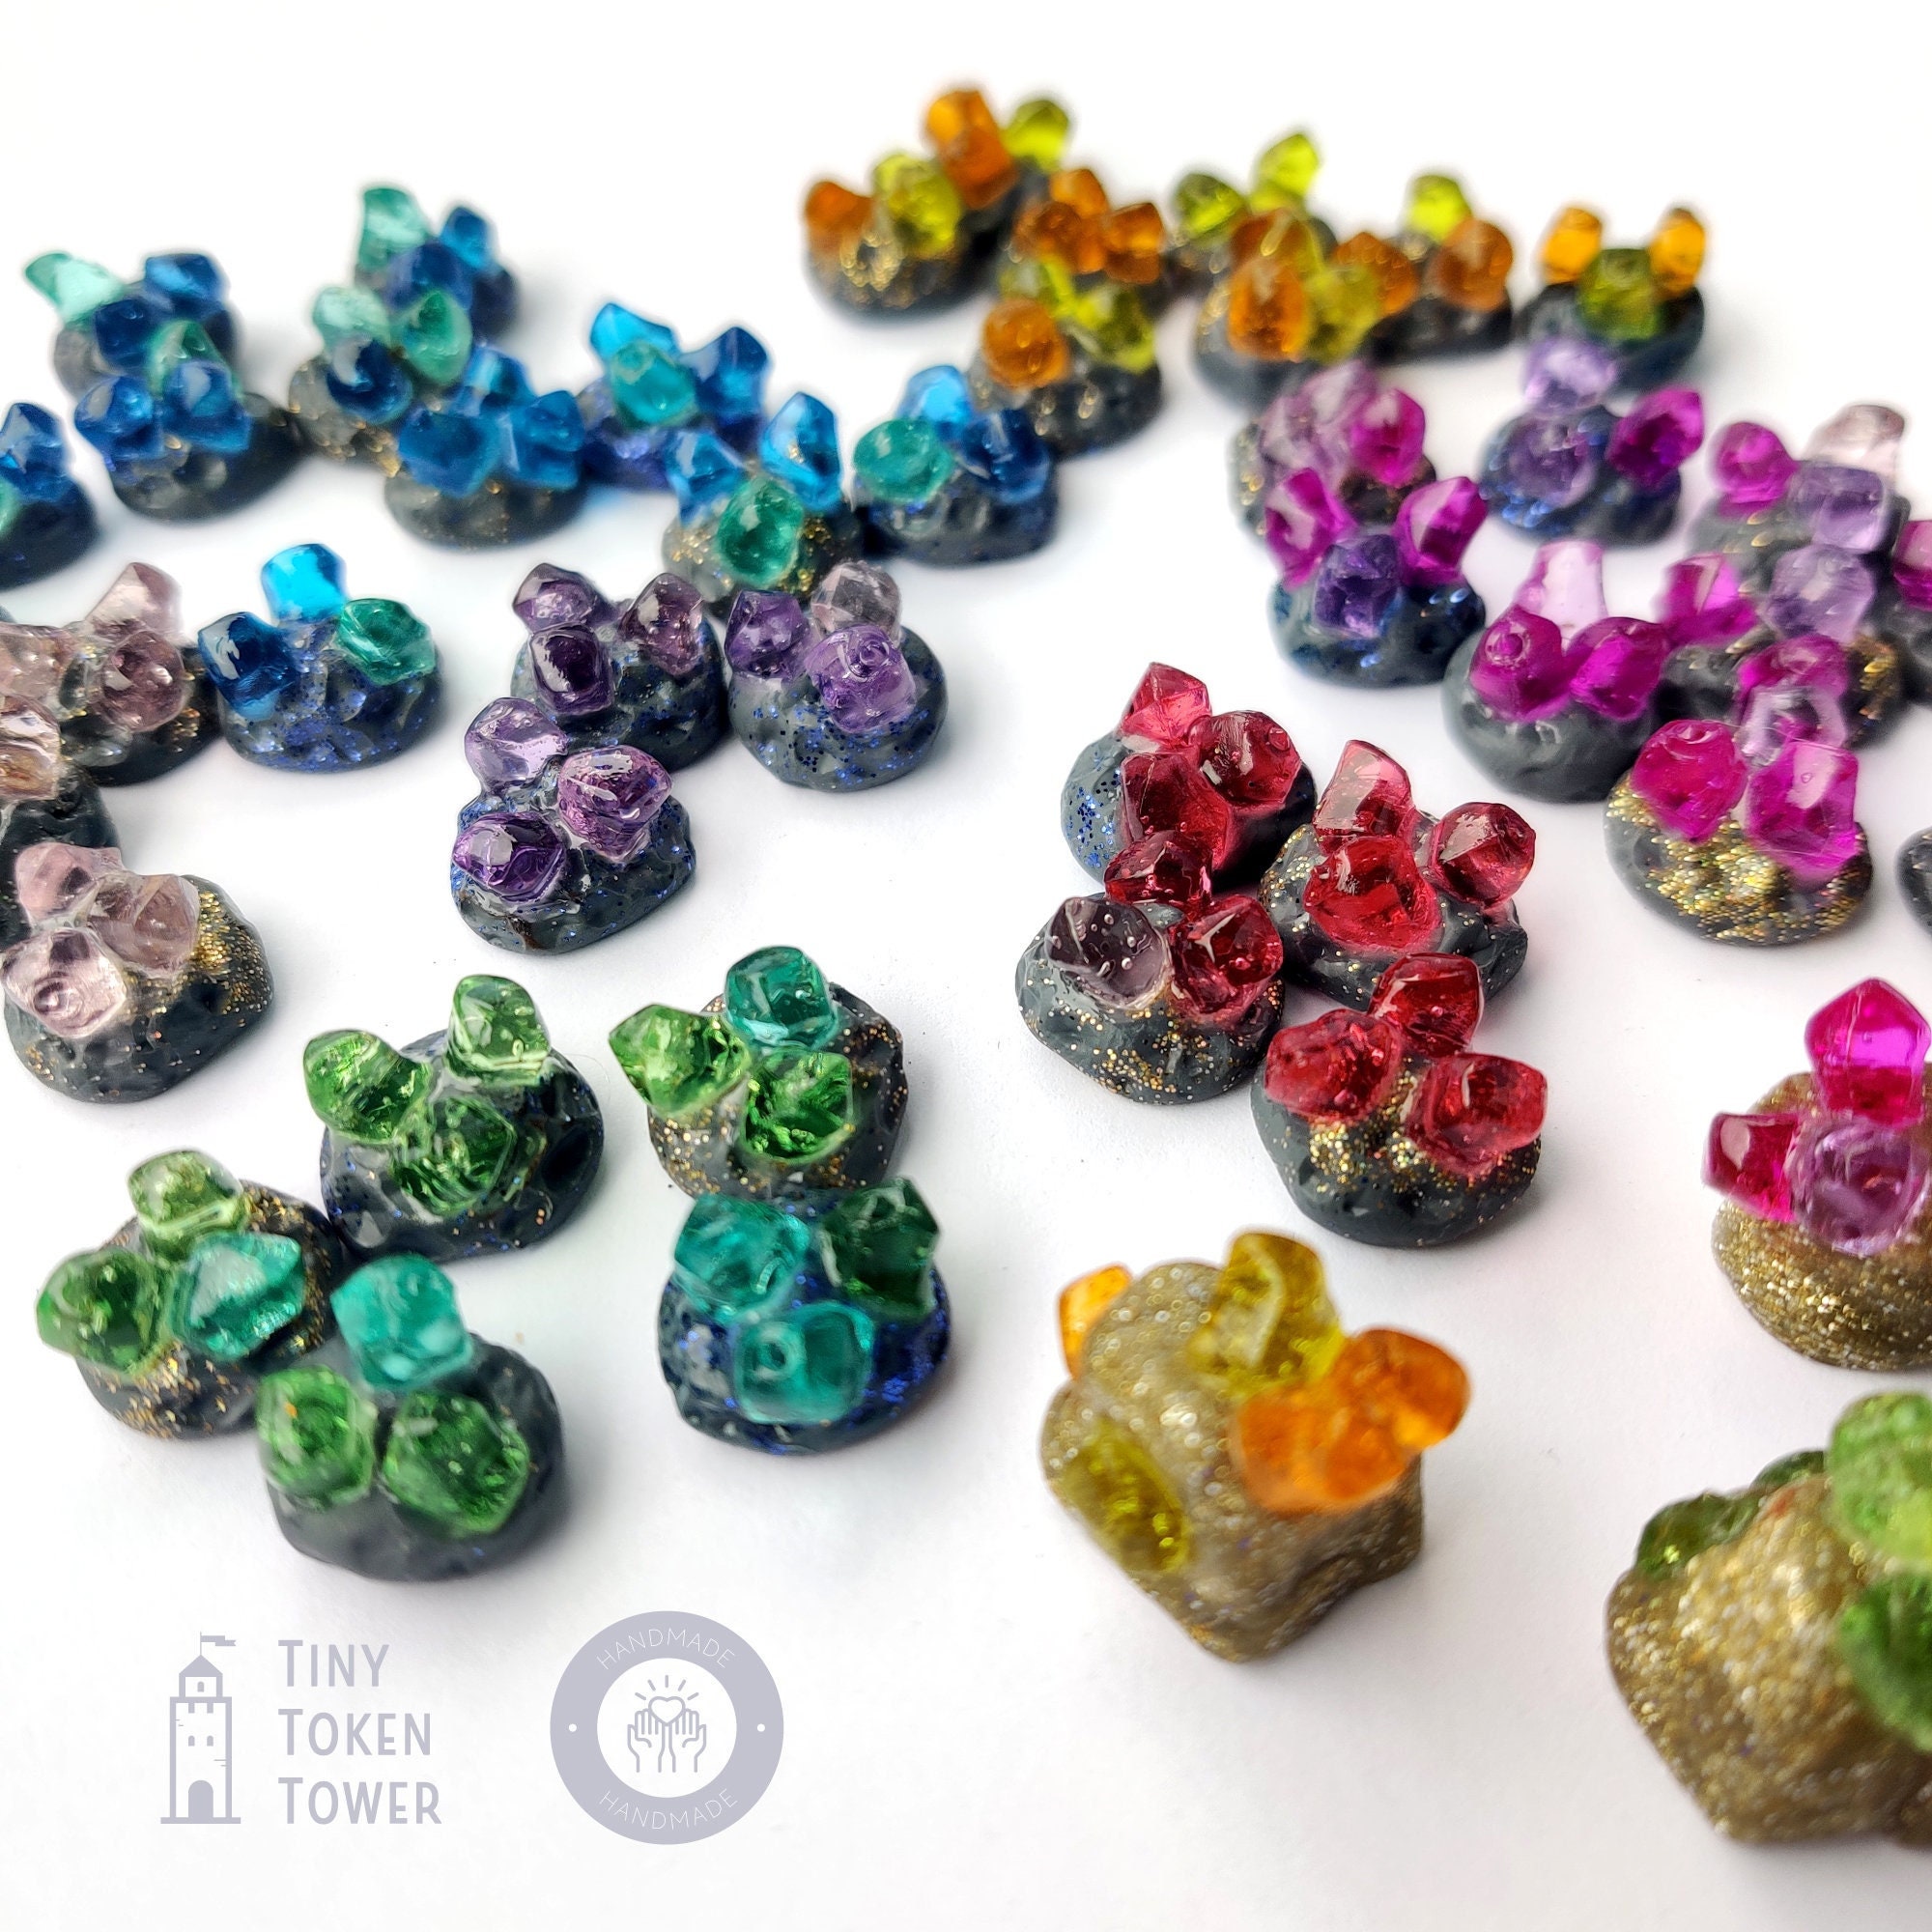 Plastic Gems for Gaming/life Counters/tokens/crystals/stones